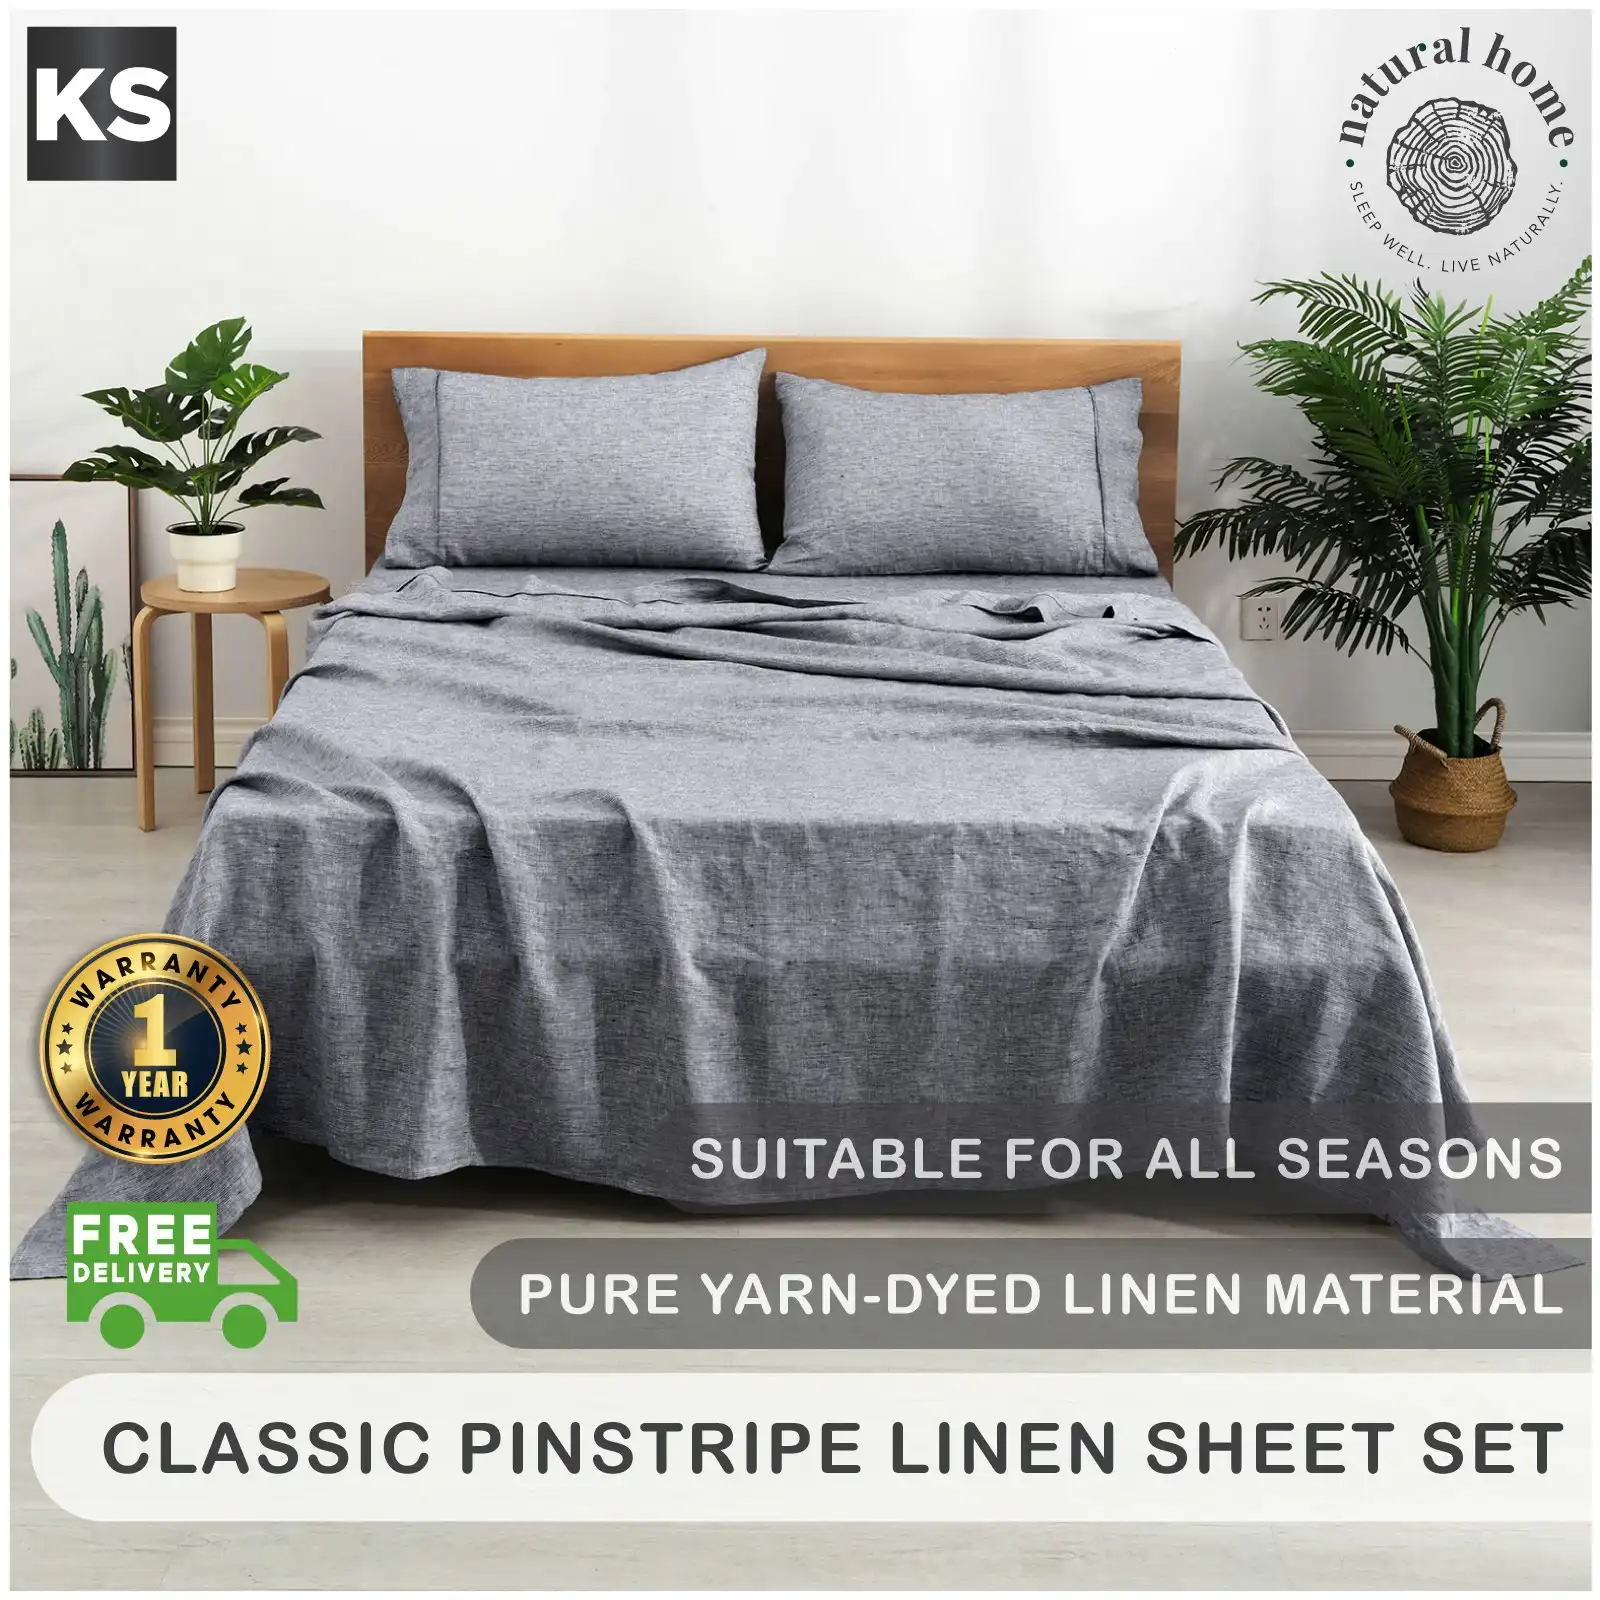 Natural Home Classic Pinstripe Linen Sheet Set Dark with White Pinstripe King Single Bed